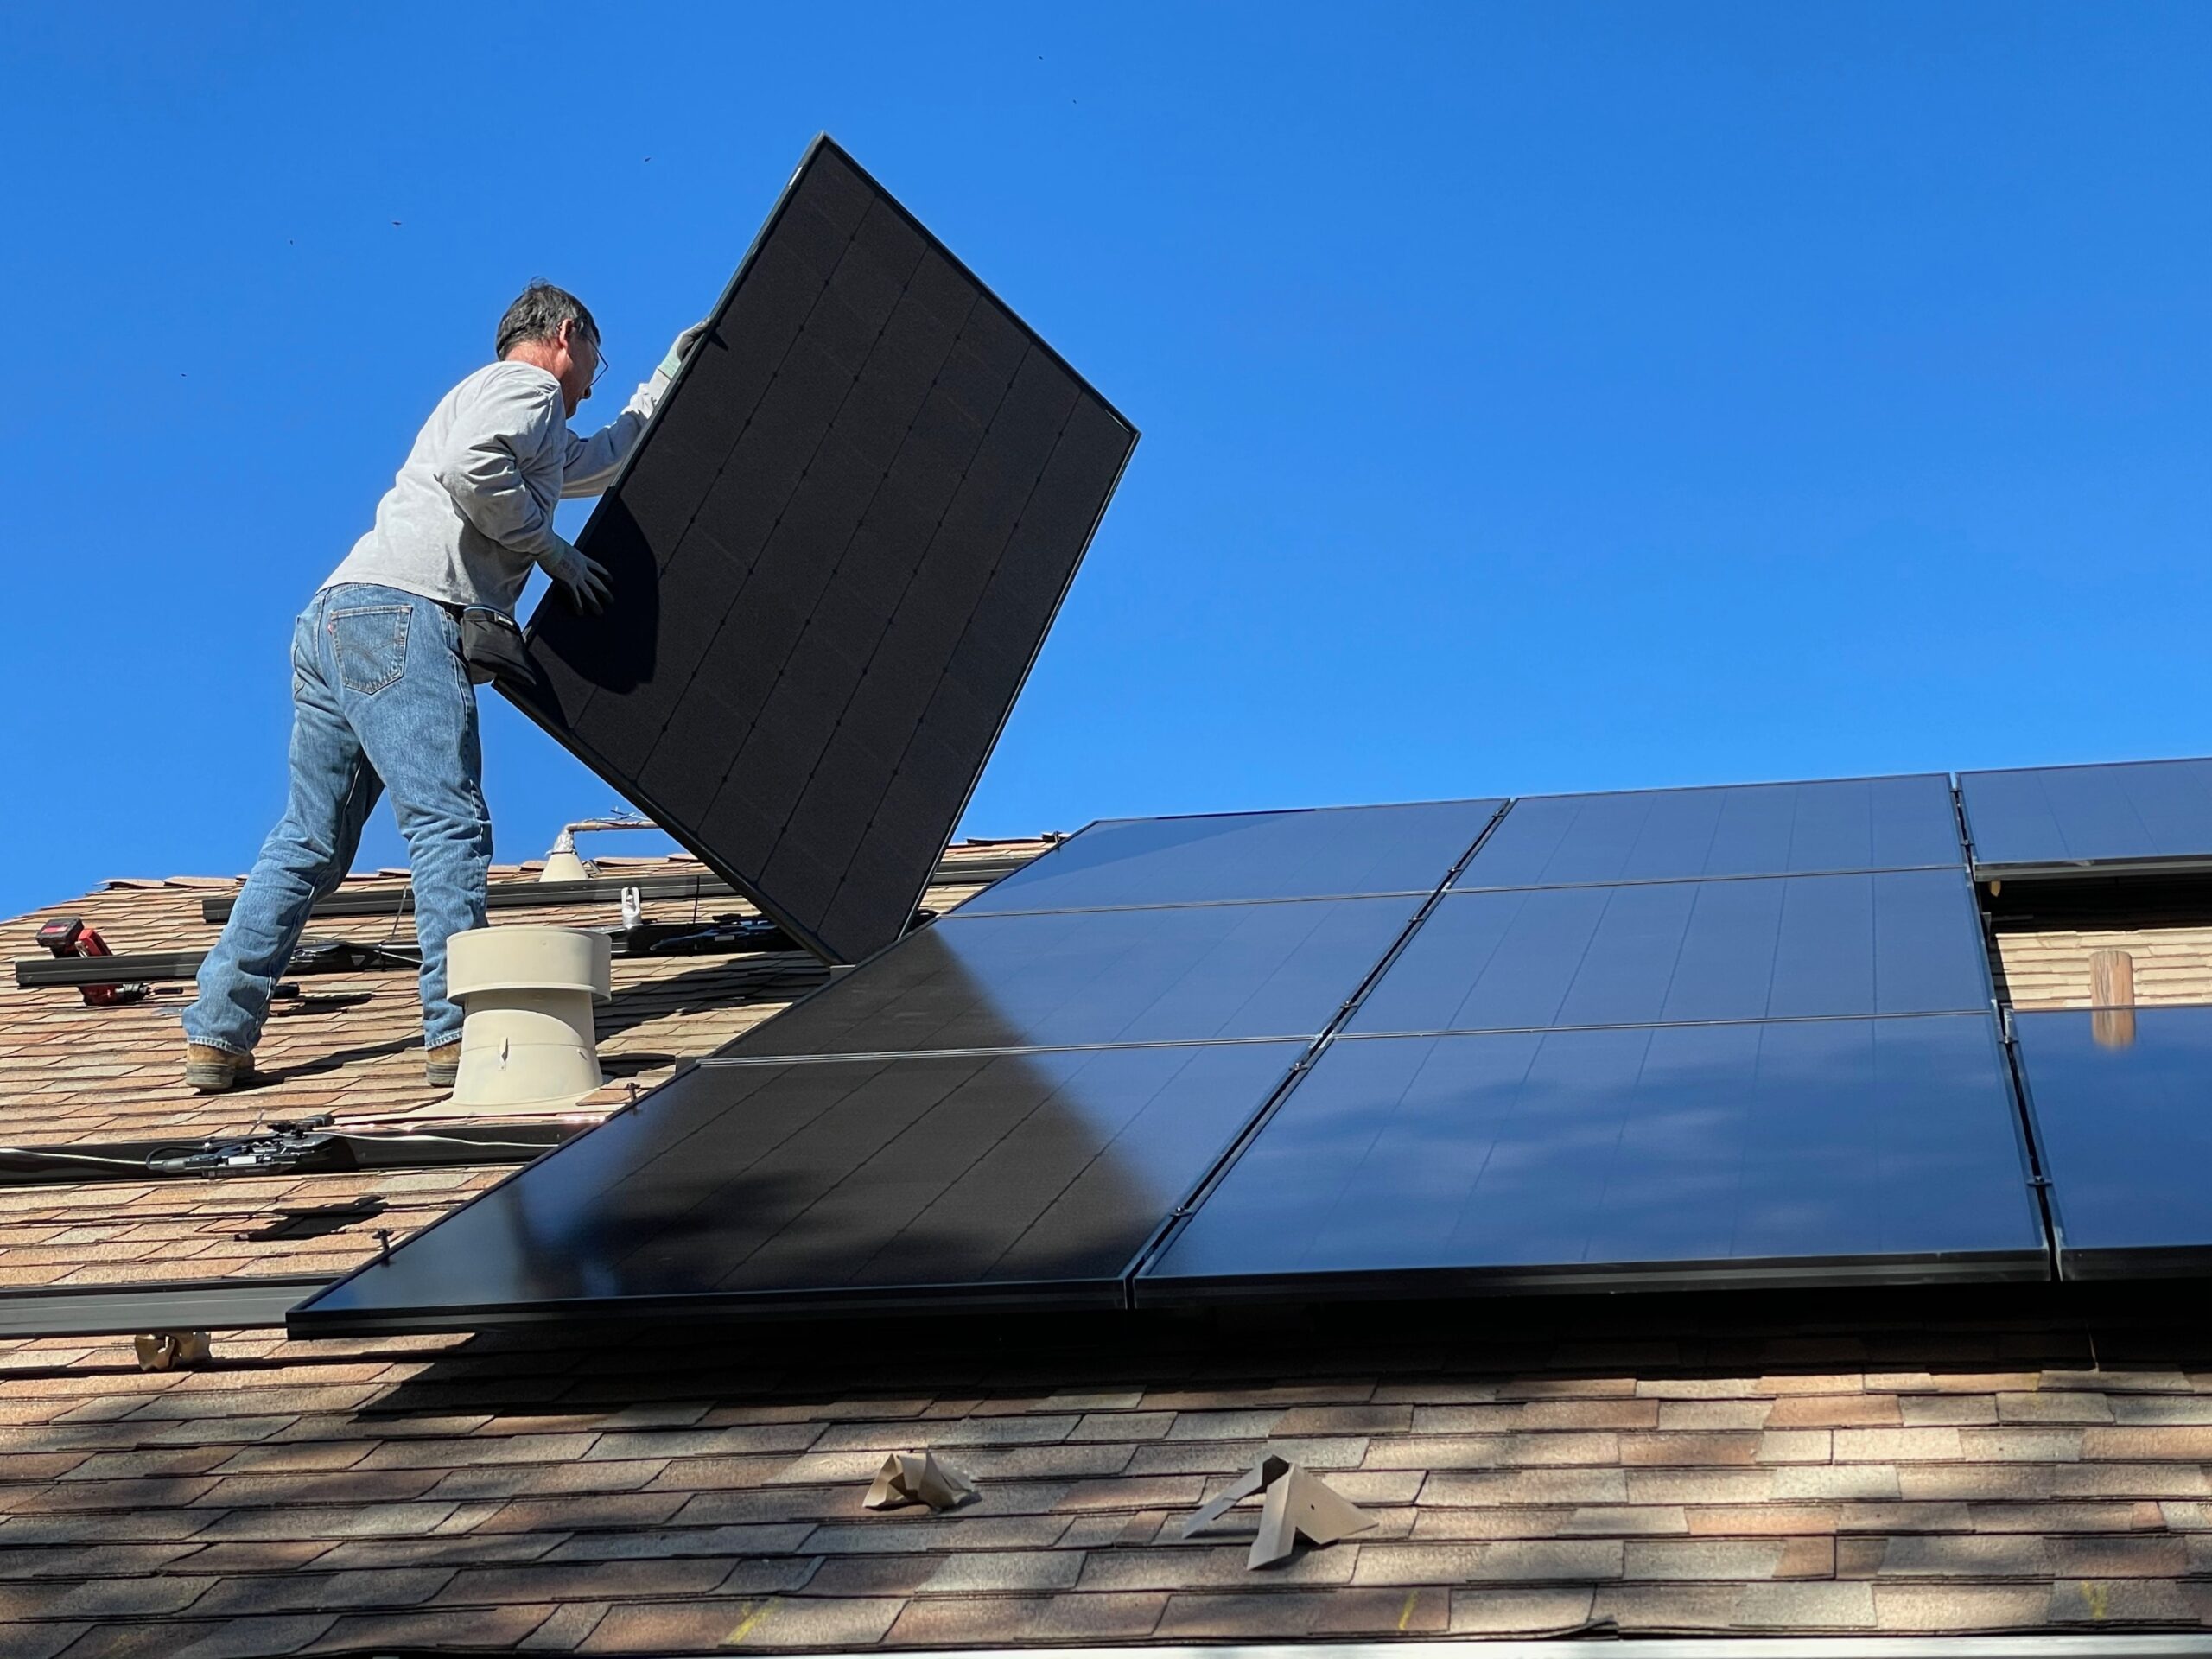 A worker installs solar panels on the roof of a house